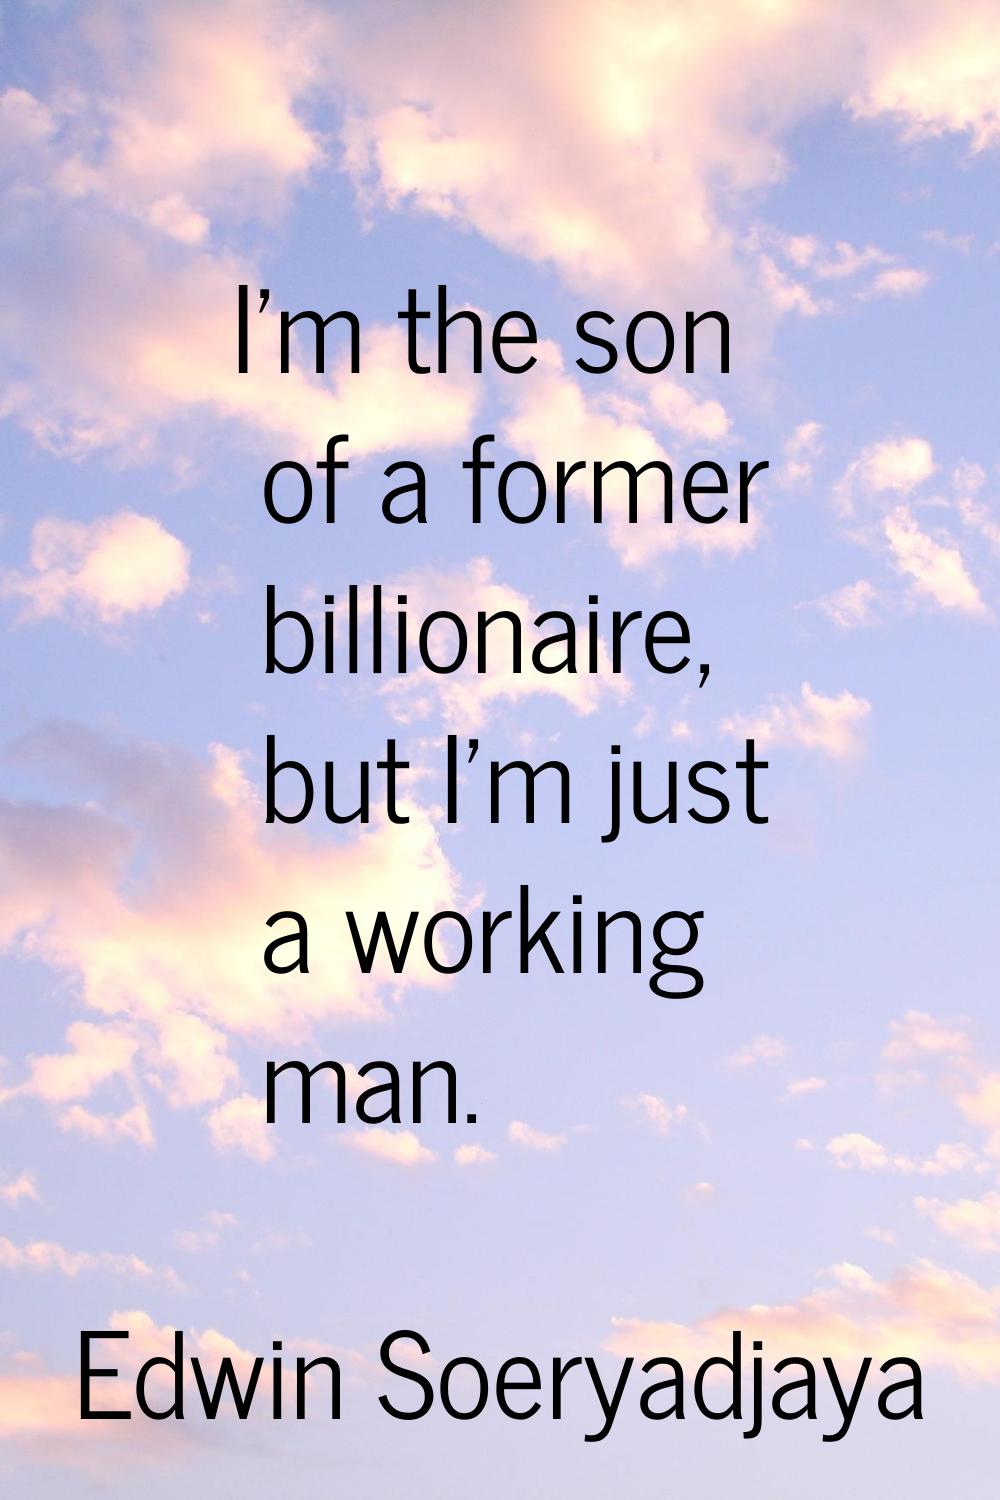 I'm the son of a former billionaire, but I'm just a working man.